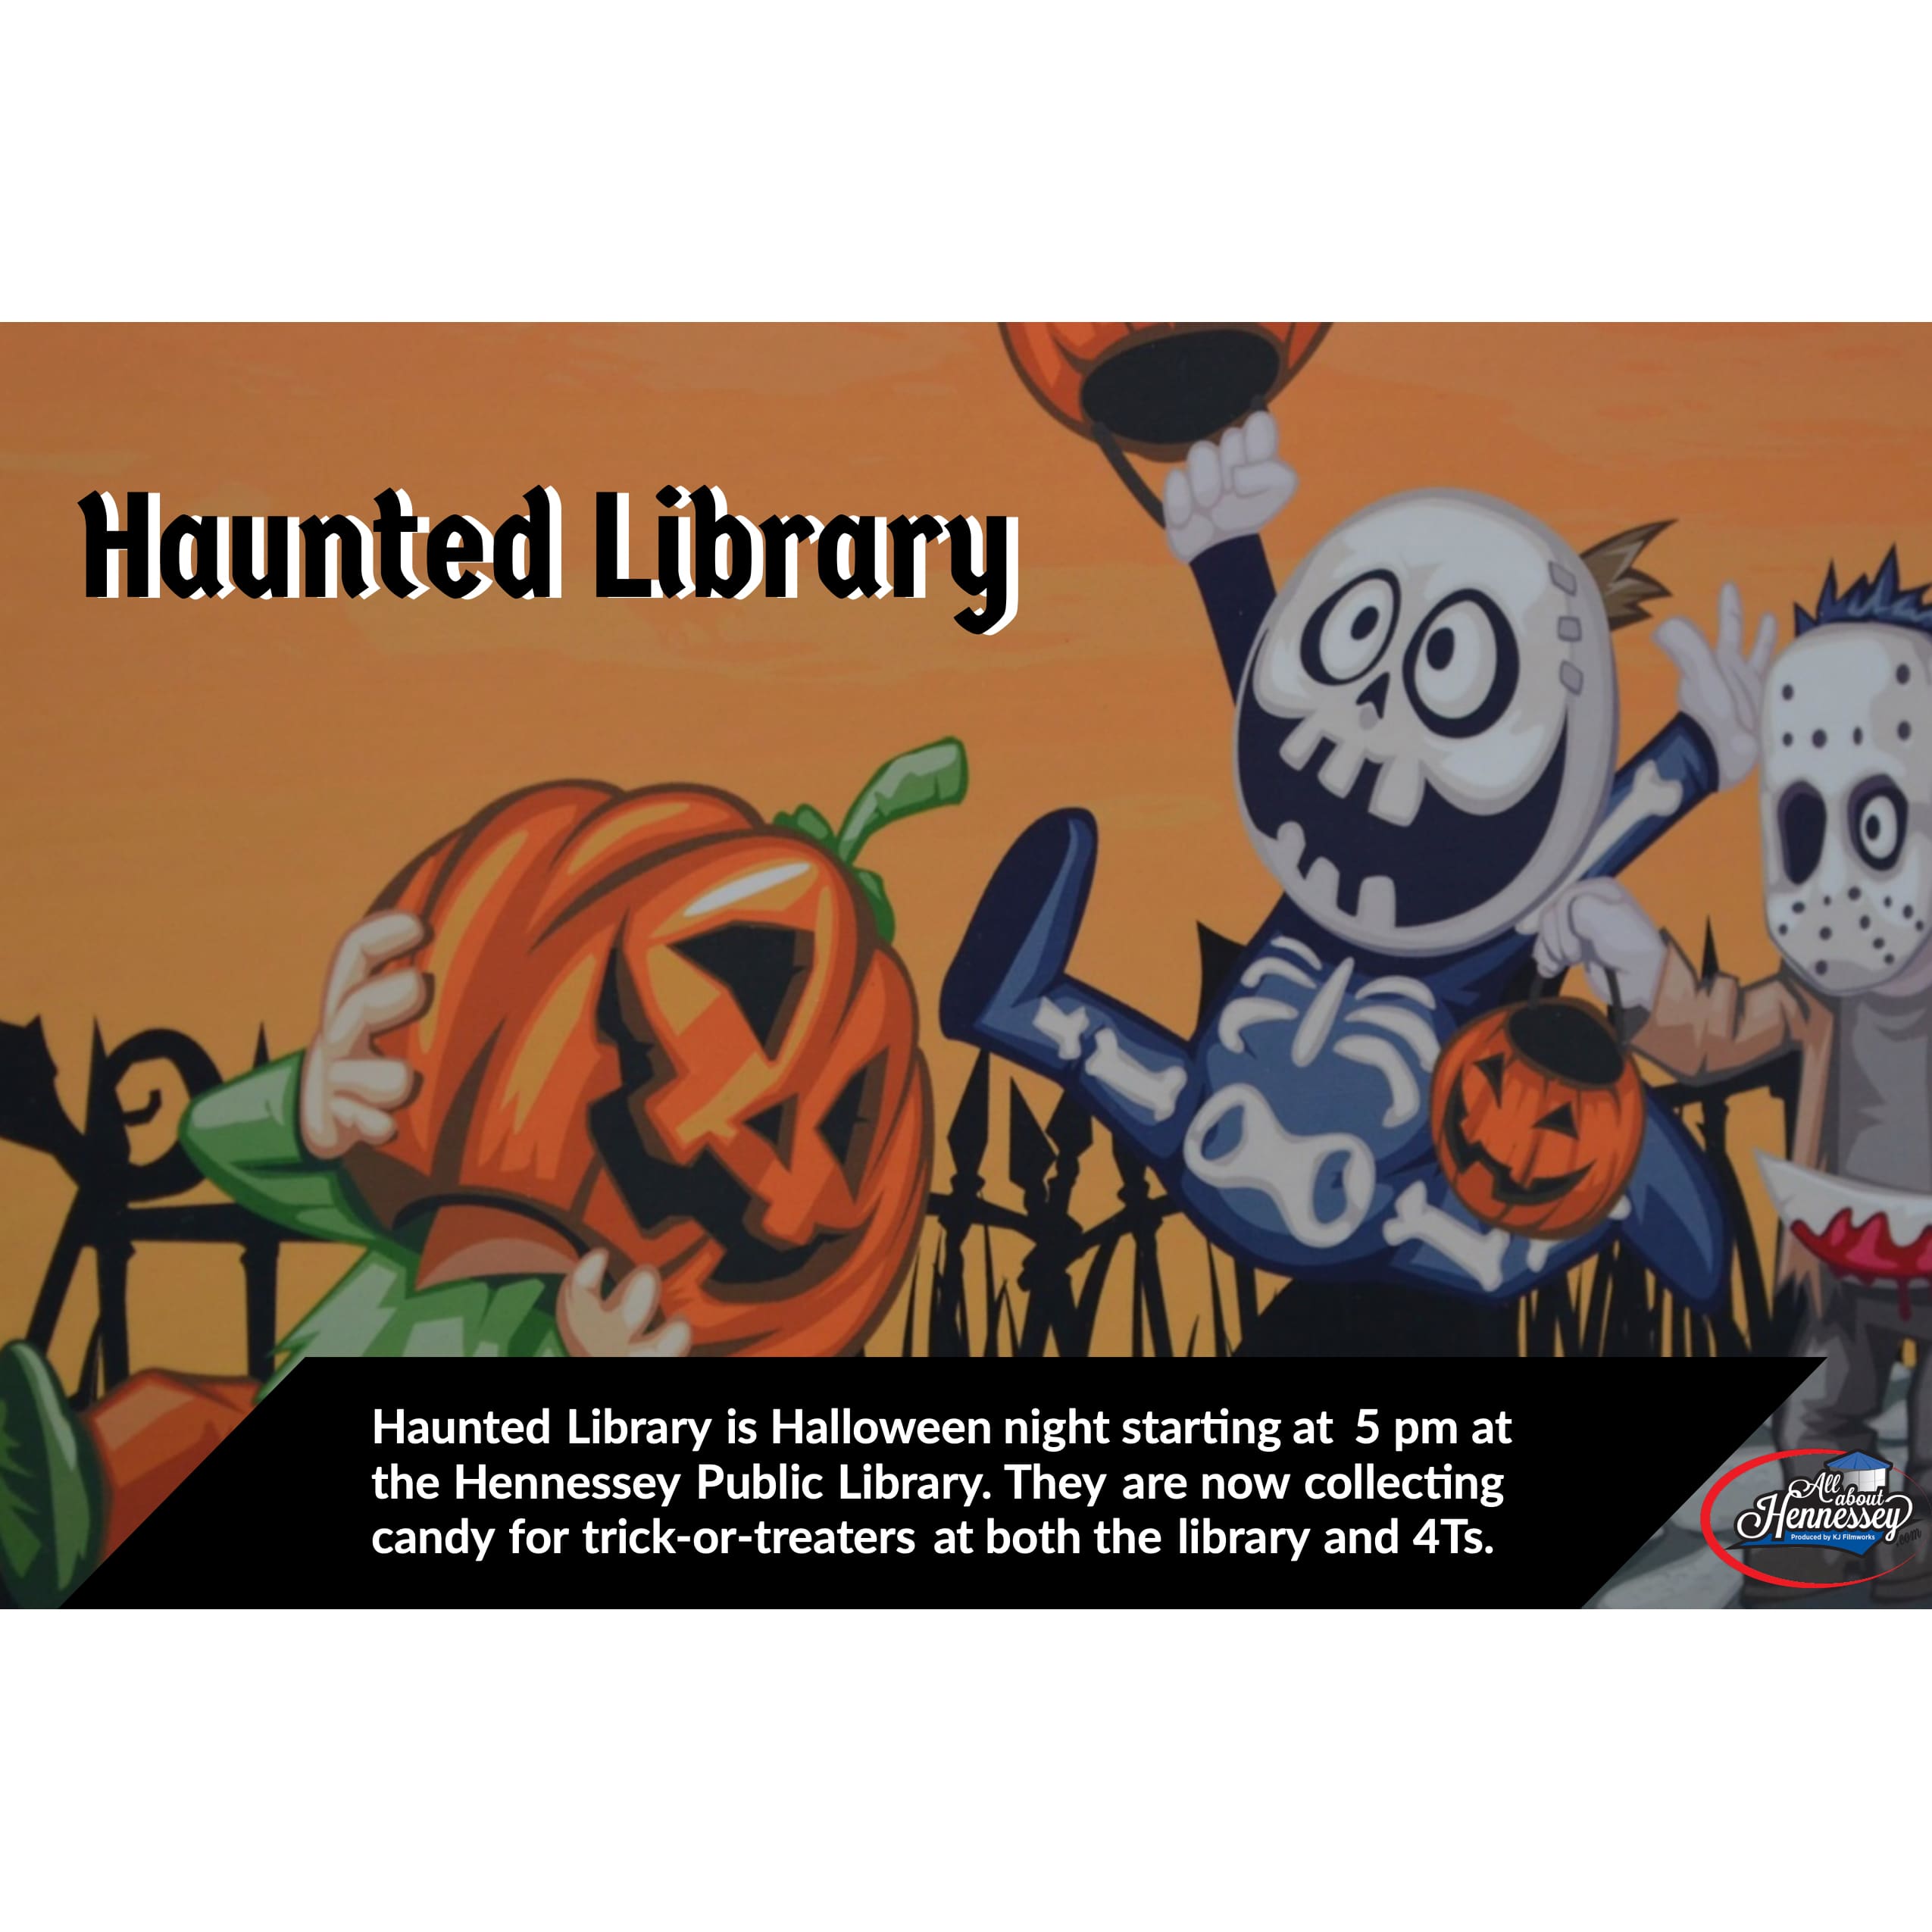 HAUNTED LIBRARY OCTOBER 31